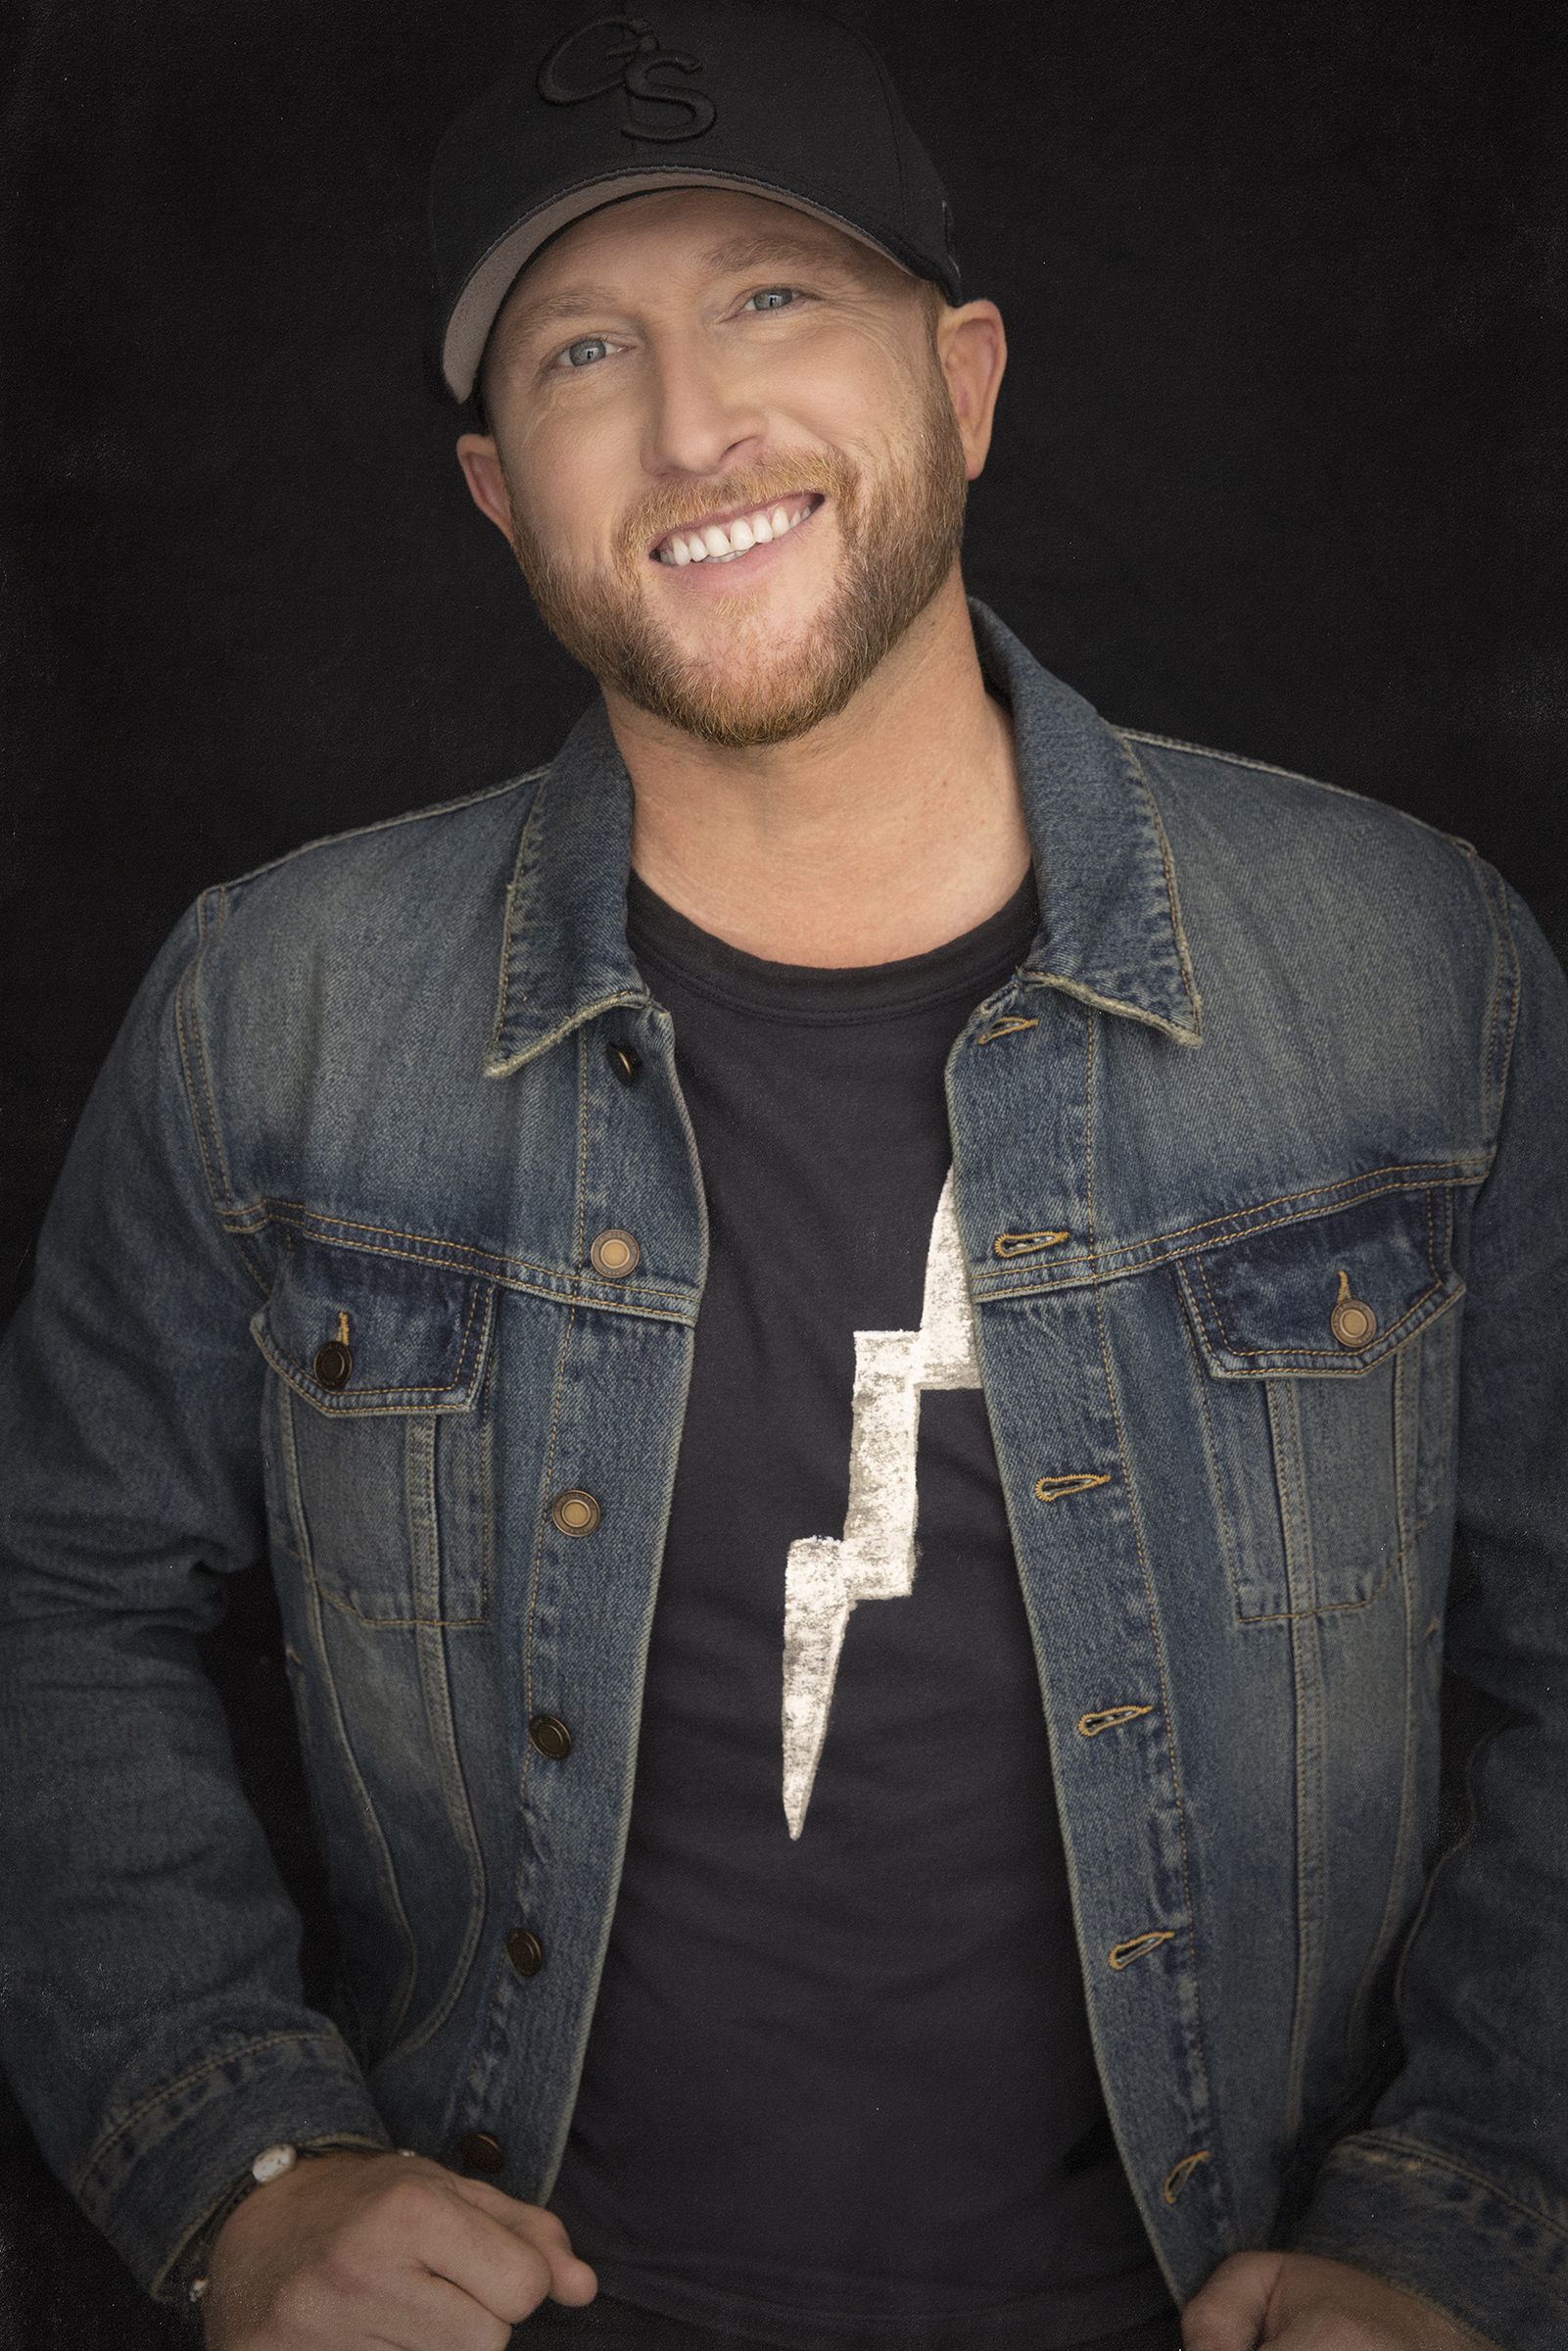 COLE SWINDELL CELEBRATES RELEASE OF NEW ALBUM STEREOTYPE WITH PERFORMANCES ON GOOD MORNING AMERICA AND 2022 CMT MUSIC AWARDS APRIL 11